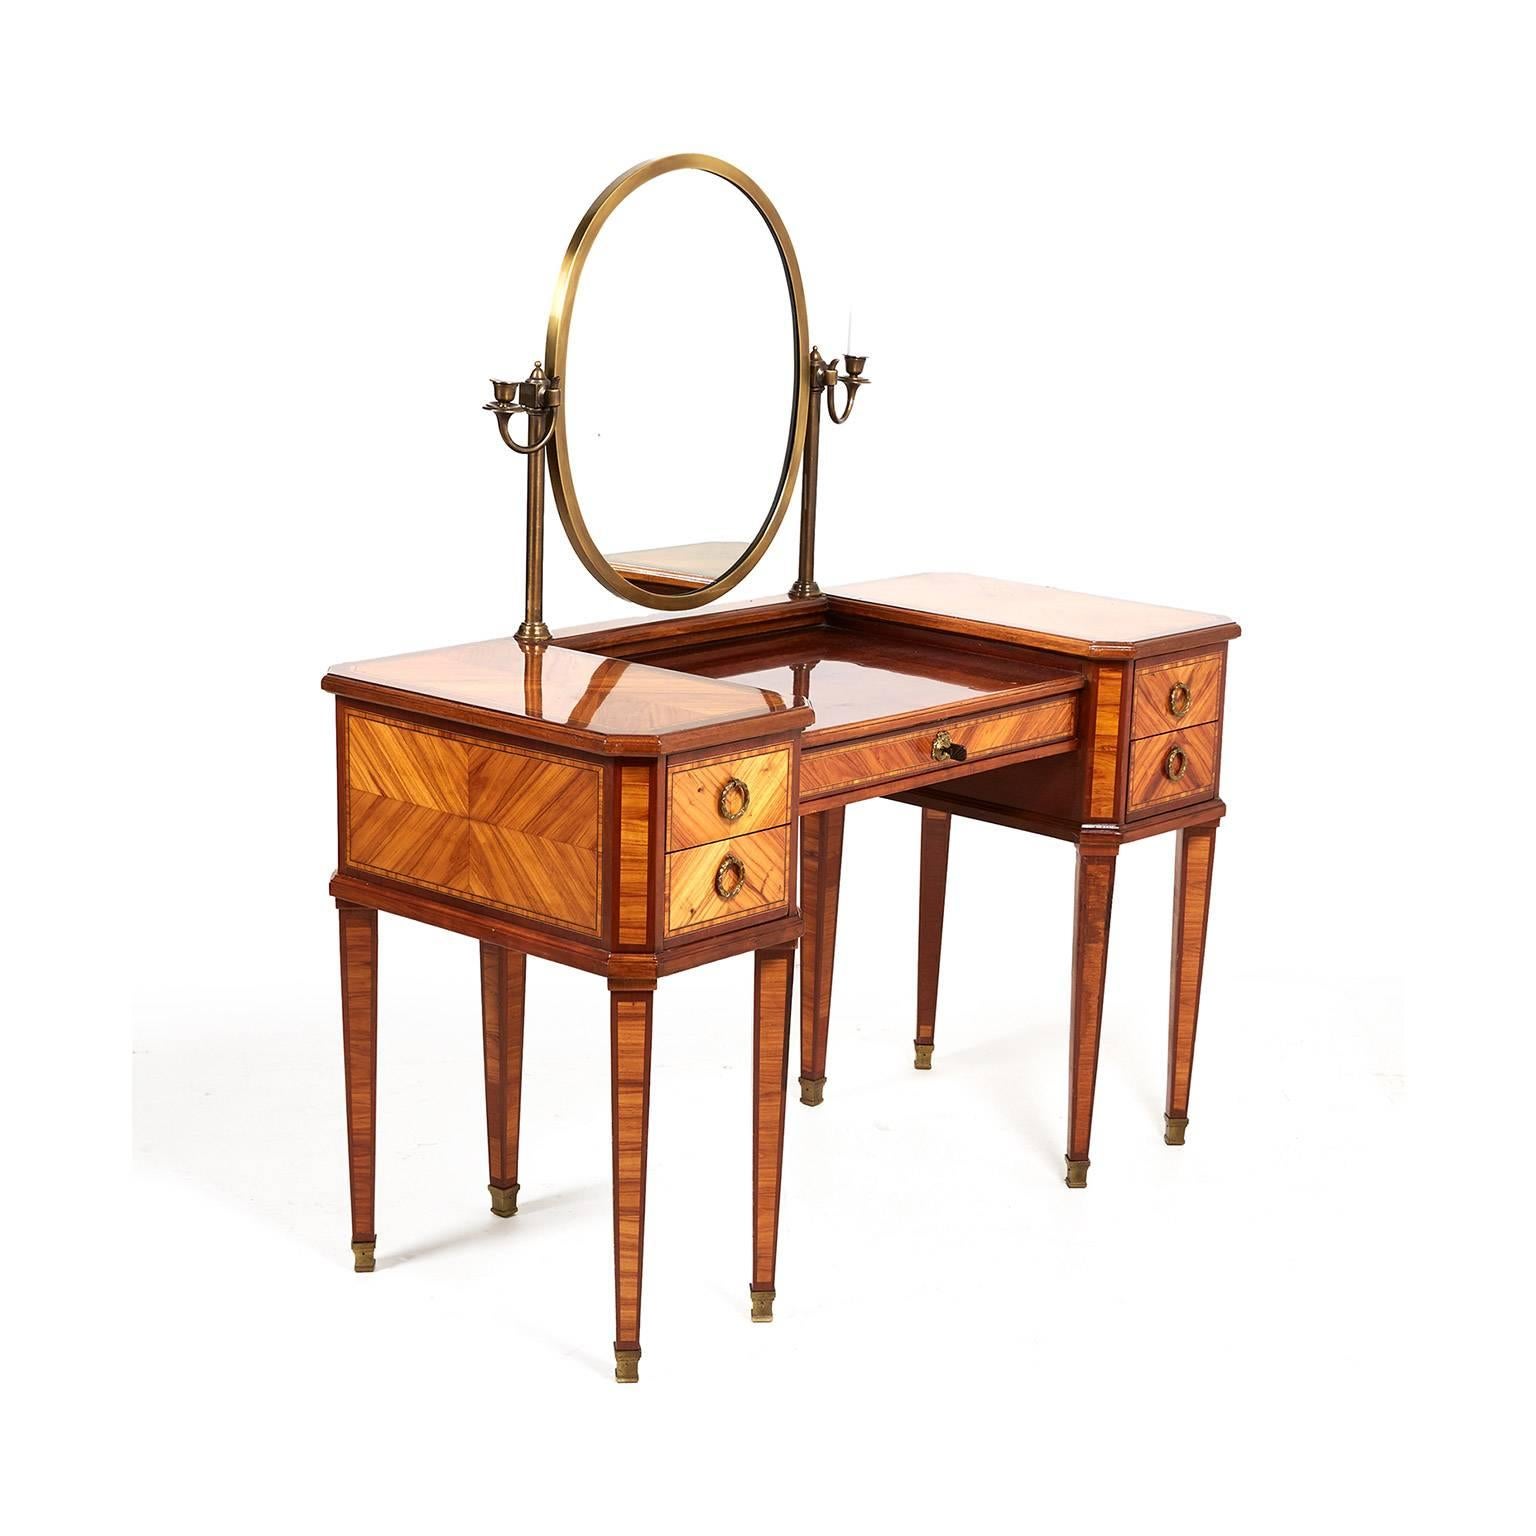 Antique mid-20th century highly inlaid mahogany and kingwood French vanity with a brass-framed mirror enhanced on either side by a pair of brass sconces. From the Le Bristol Hotel in Paris. (Original Le Bristol Hotel paper still in one of the